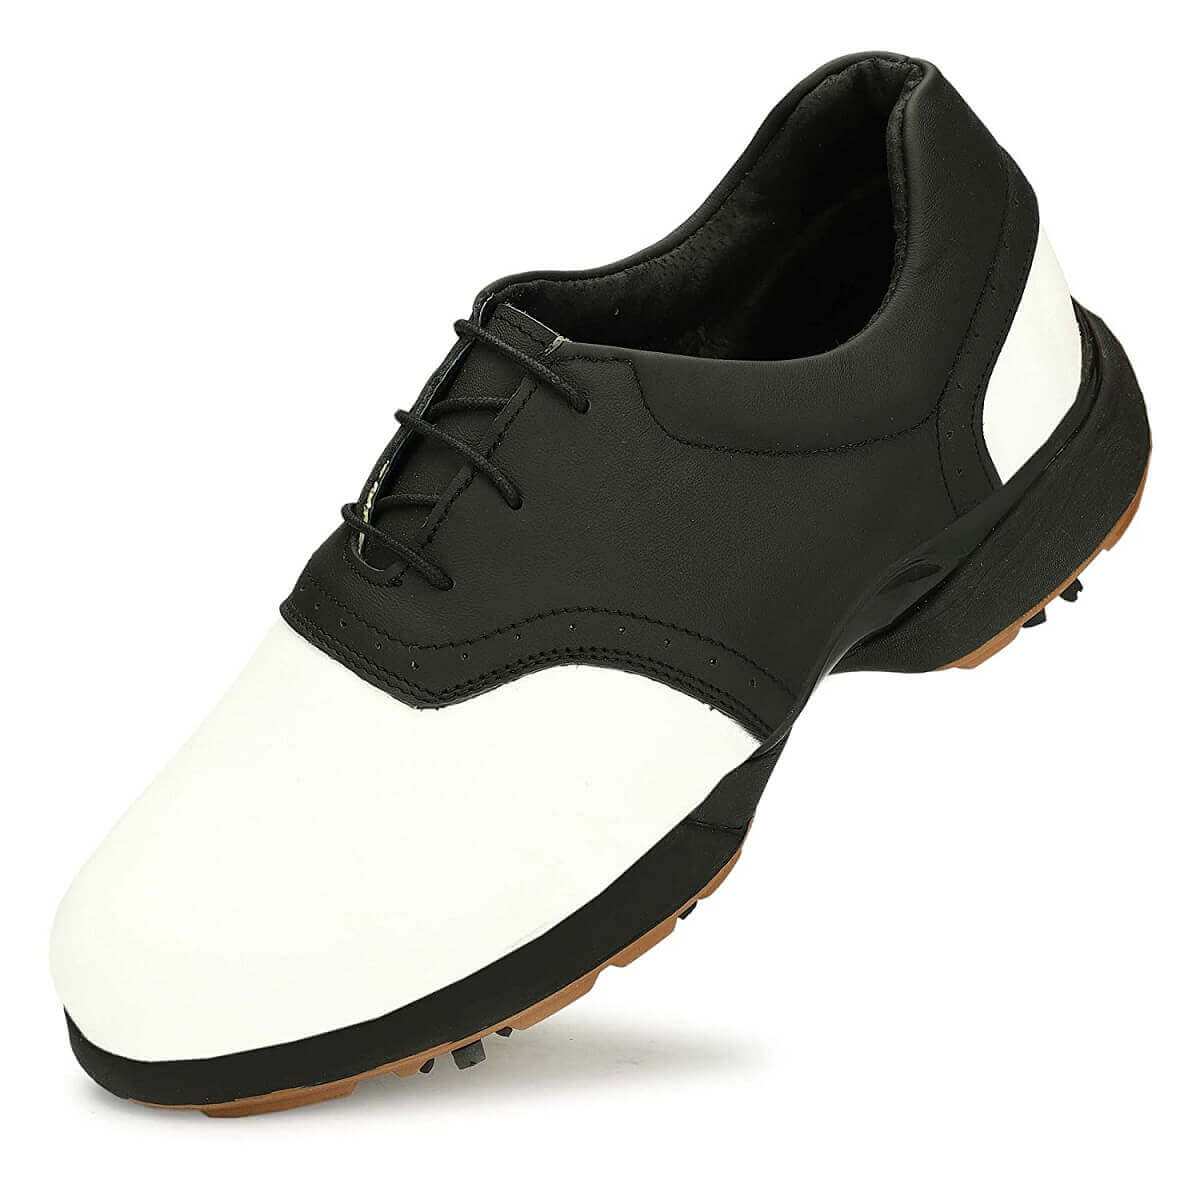 Proase Golf Shoes (Black/White) – Sports Wing | Shop on